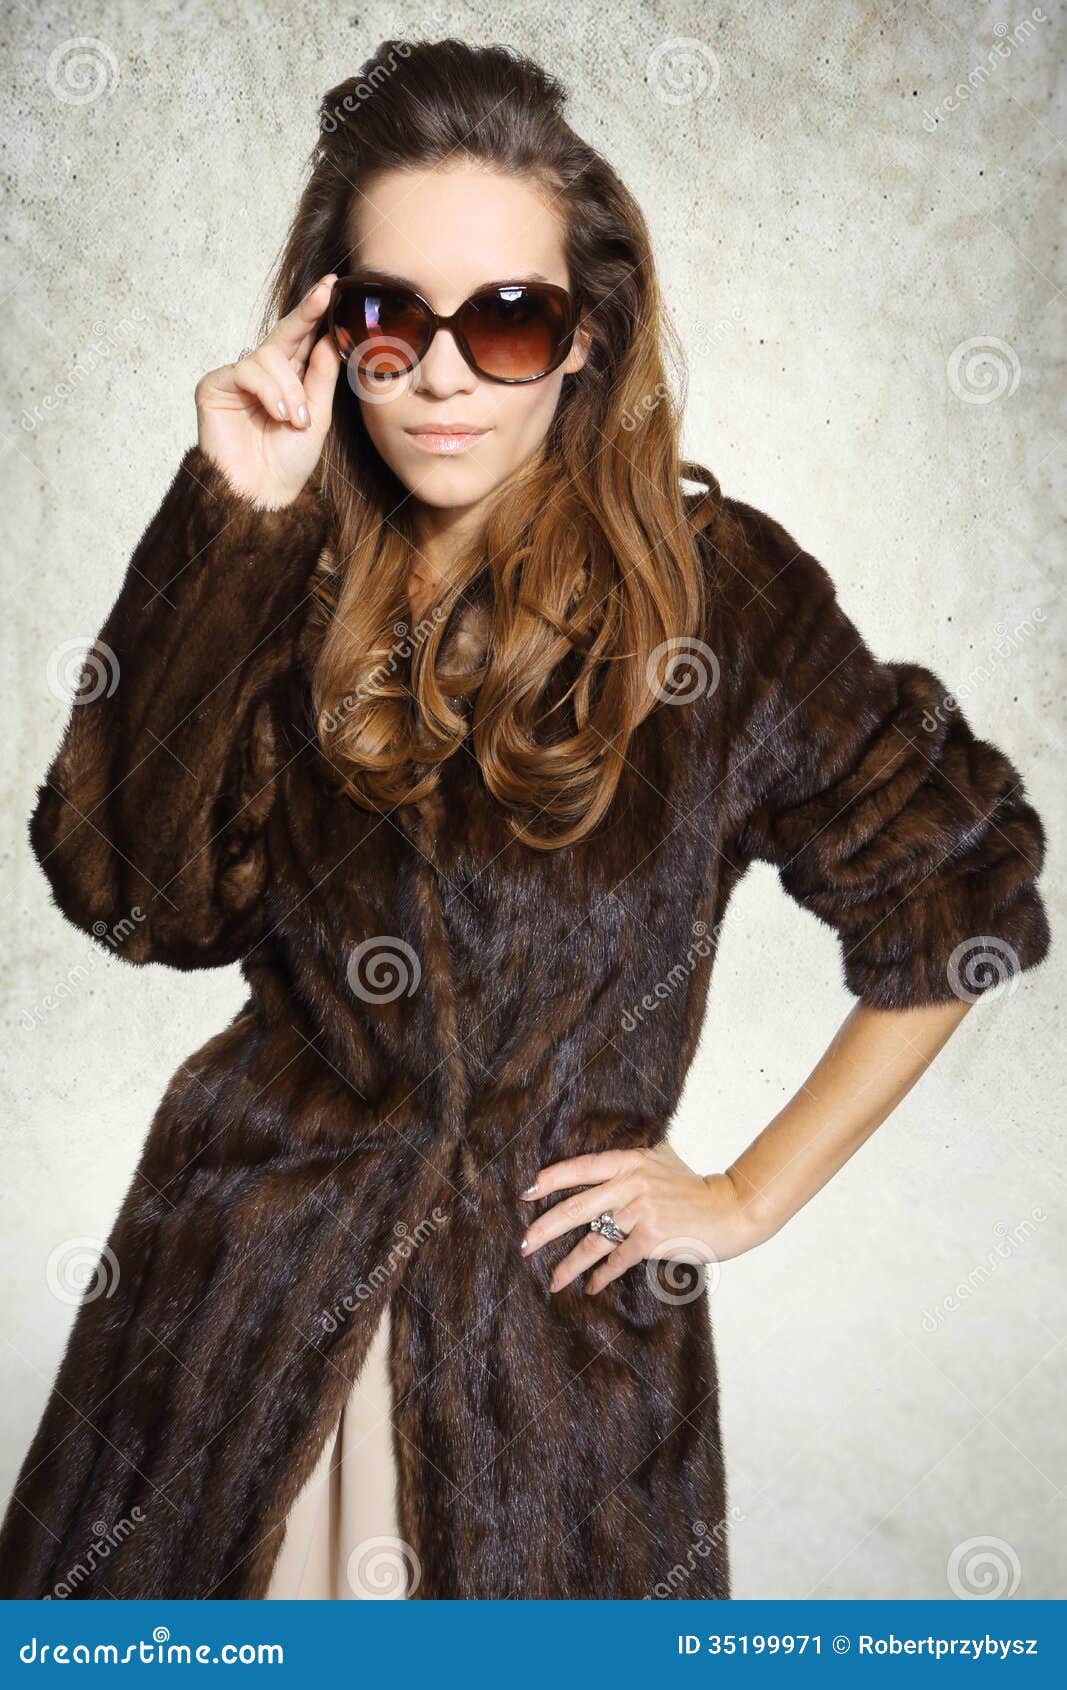 Mysterious Elegant Woman In A Fur Coat And Sunglasses 